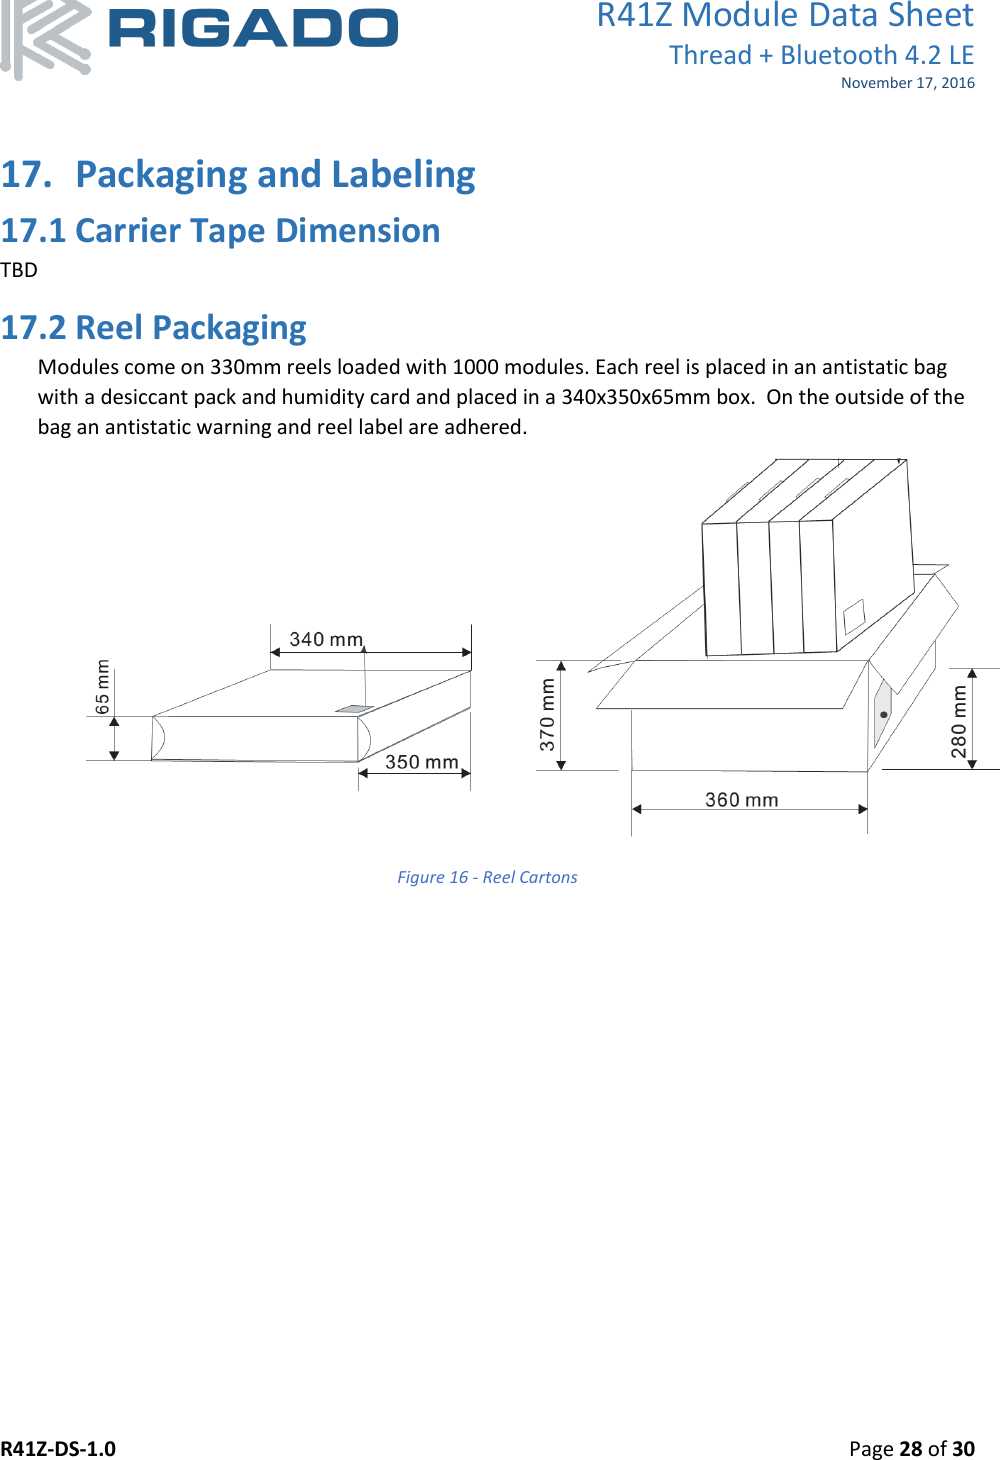 R41Z Module Data Sheet Thread + Bluetooth 4.2 LE November 17, 2016 R41Z-DS-1.0    Page 28 of 30   17. Packaging and Labeling 17.1 Carrier Tape Dimension TBD 17.2 Reel Packaging Modules come on 330mm reels loaded with 1000 modules. Each reel is placed in an antistatic bag with a desiccant pack and humidity card and placed in a 340x350x65mm box.  On the outside of the bag an antistatic warning and reel label are adhered.  Figure 16 - Reel Cartons  